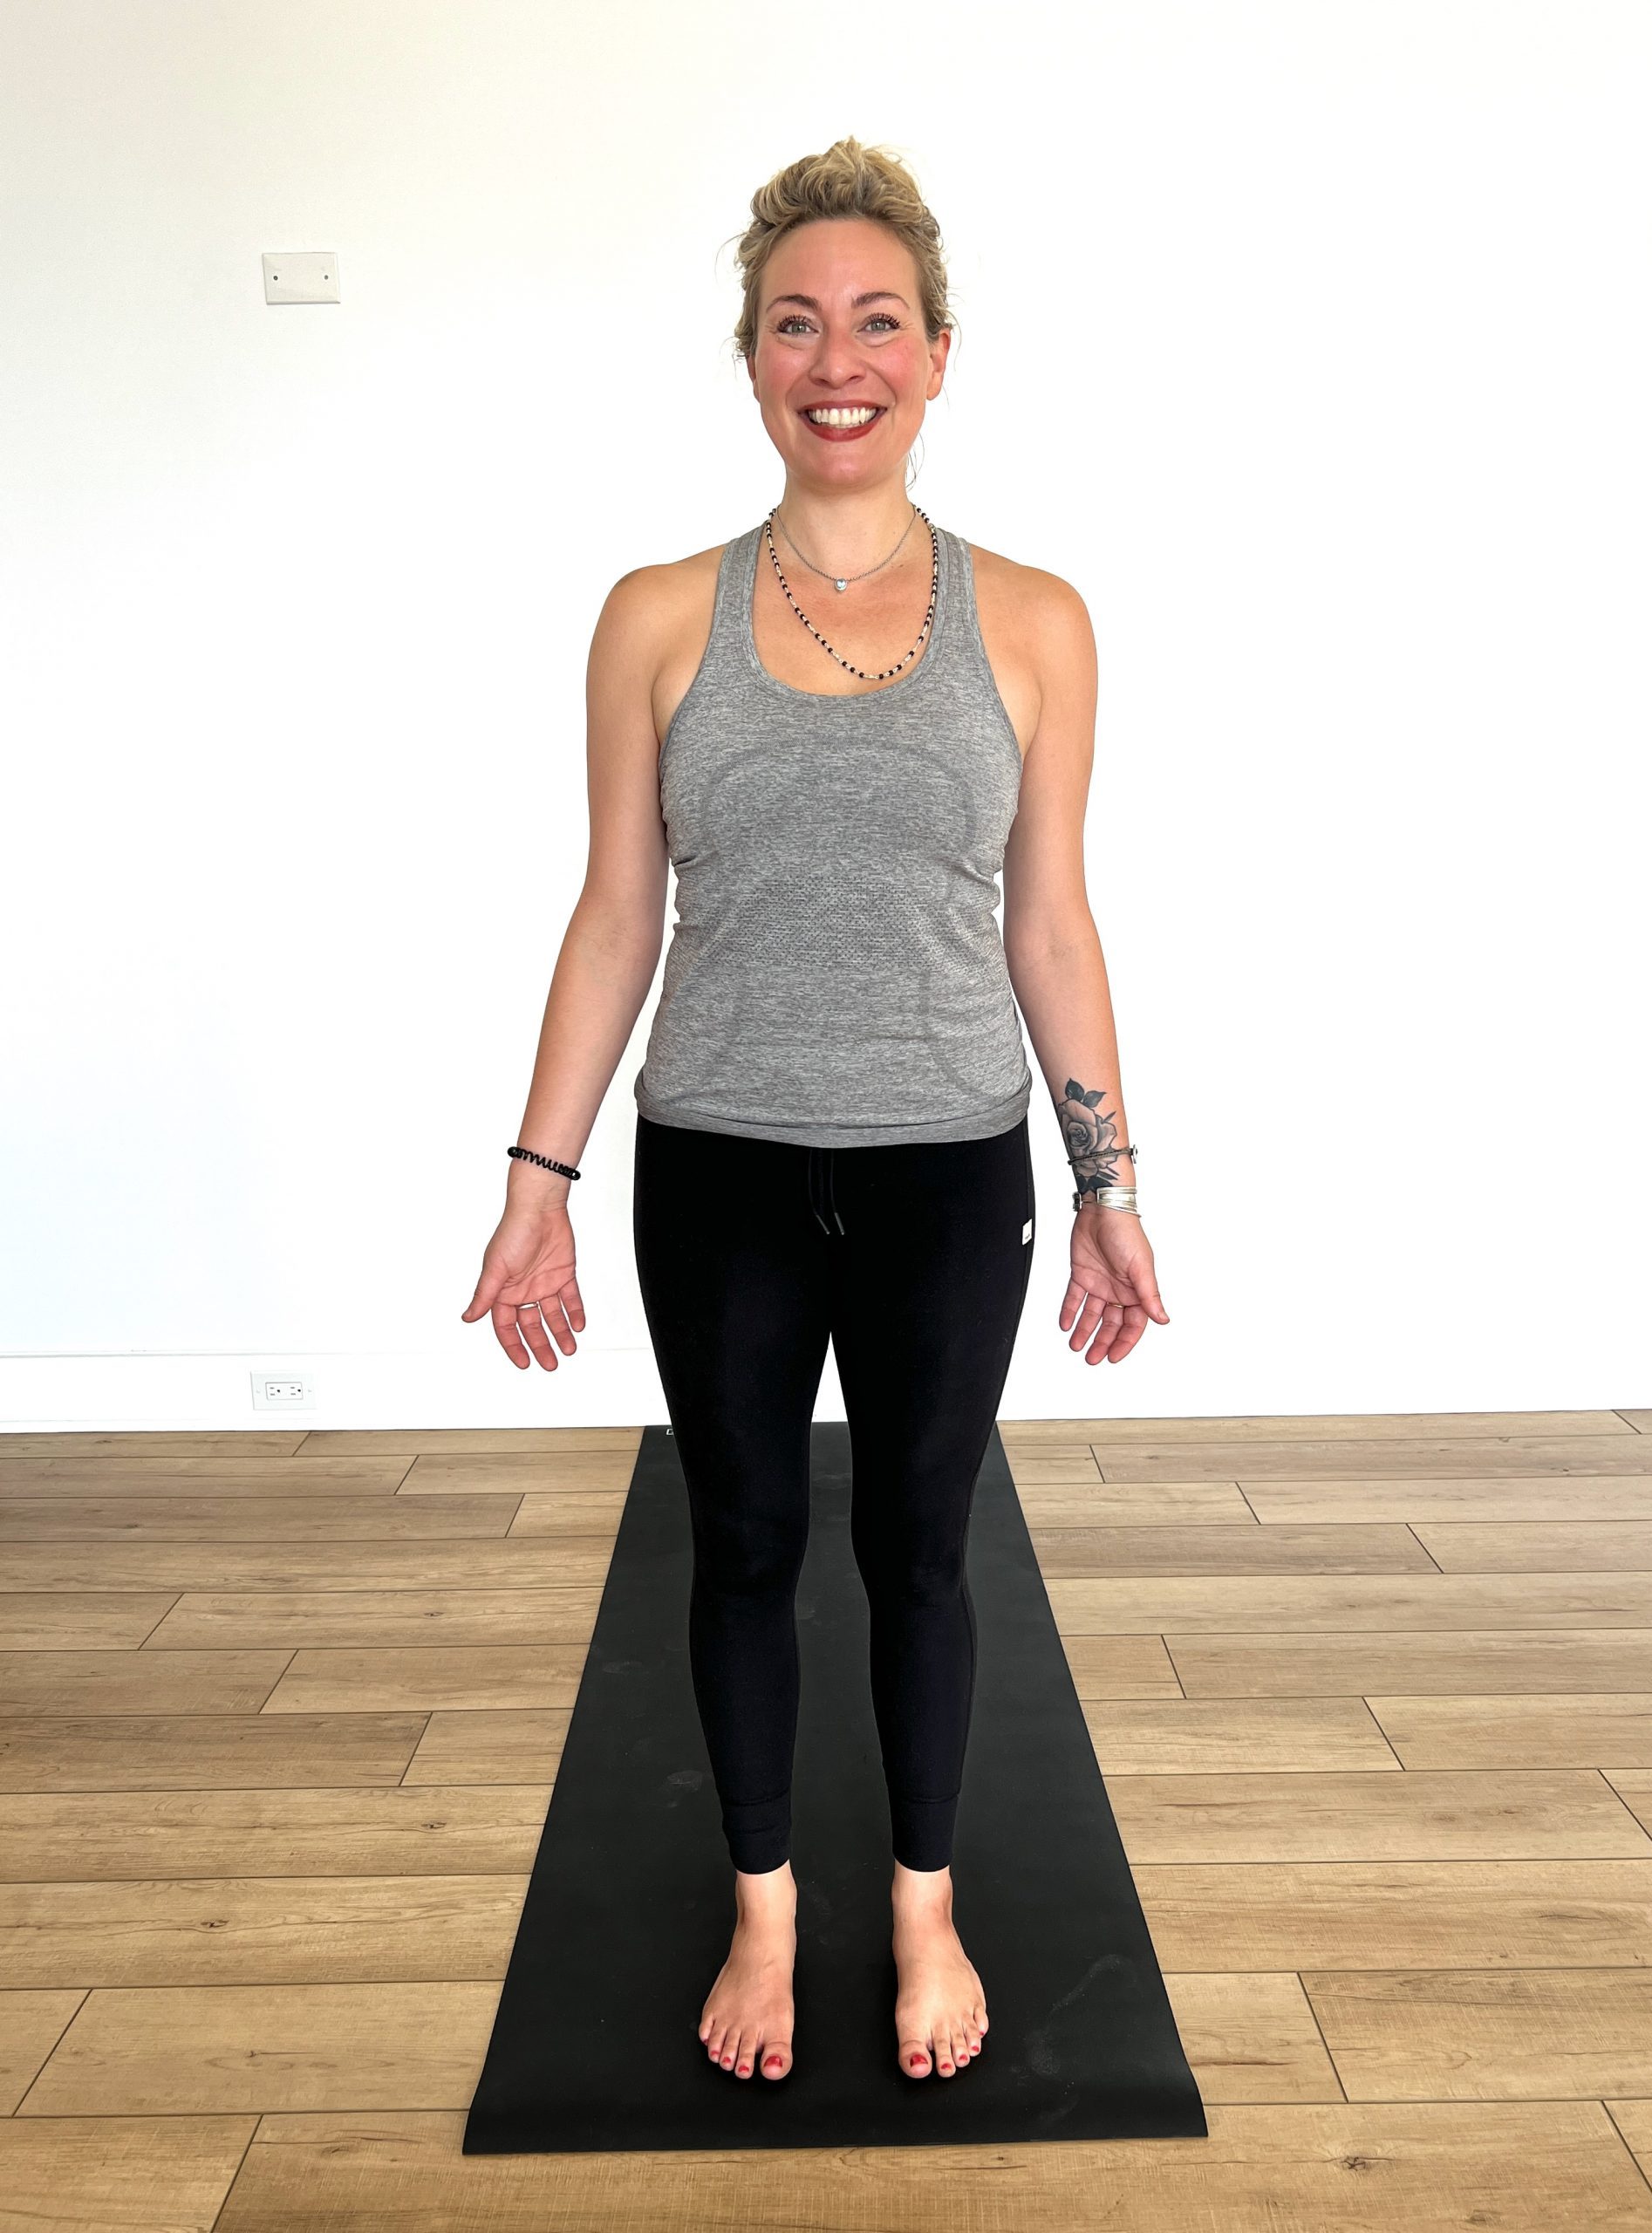 Woman standing in Tadasana (mountain pose) at the top of a black yoga mat in a grey tank top with black leggings, smiling at the camera with palms down beside her facing forward